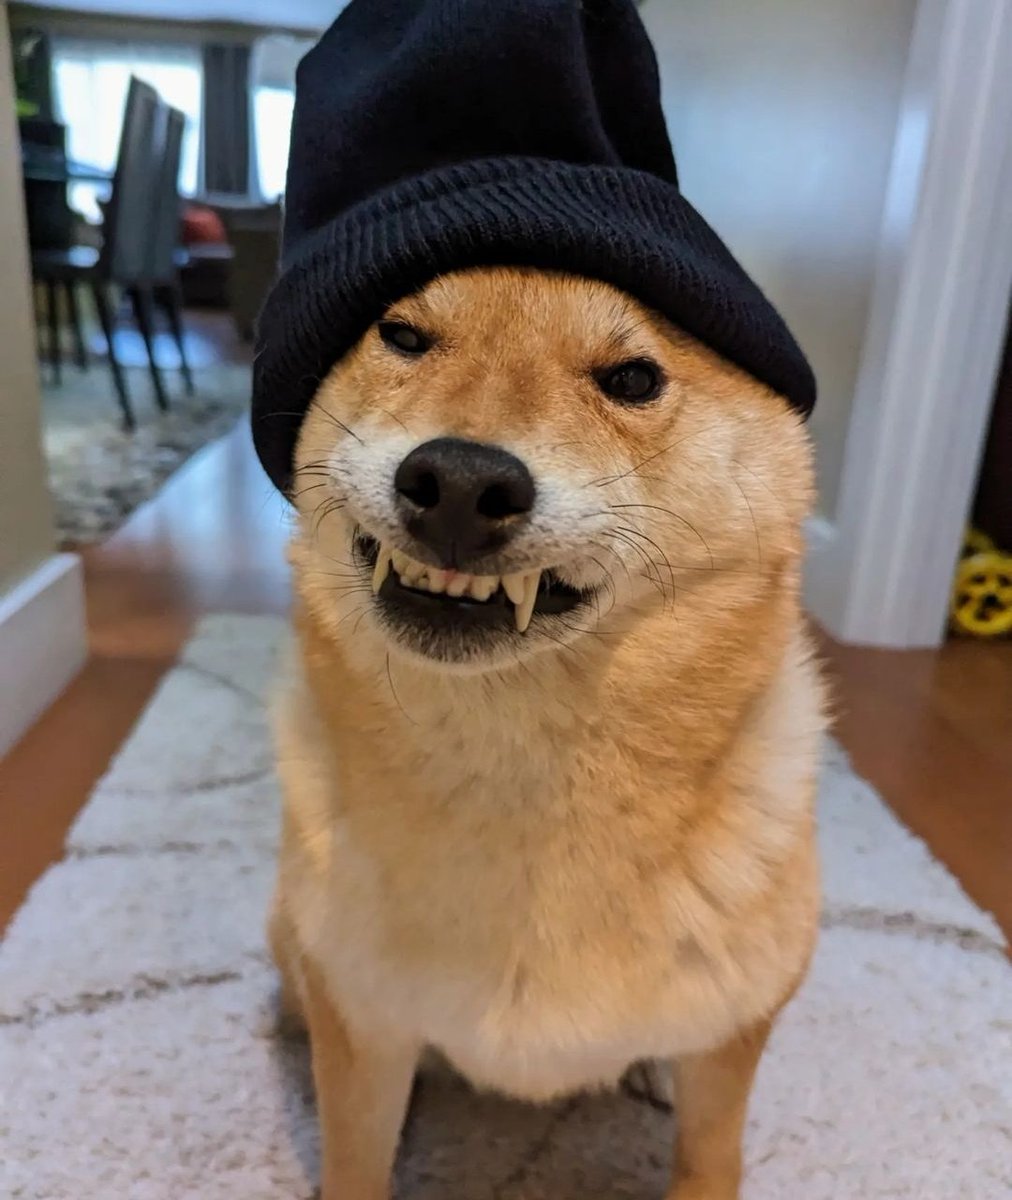 This is a robbery gimme all the treats!